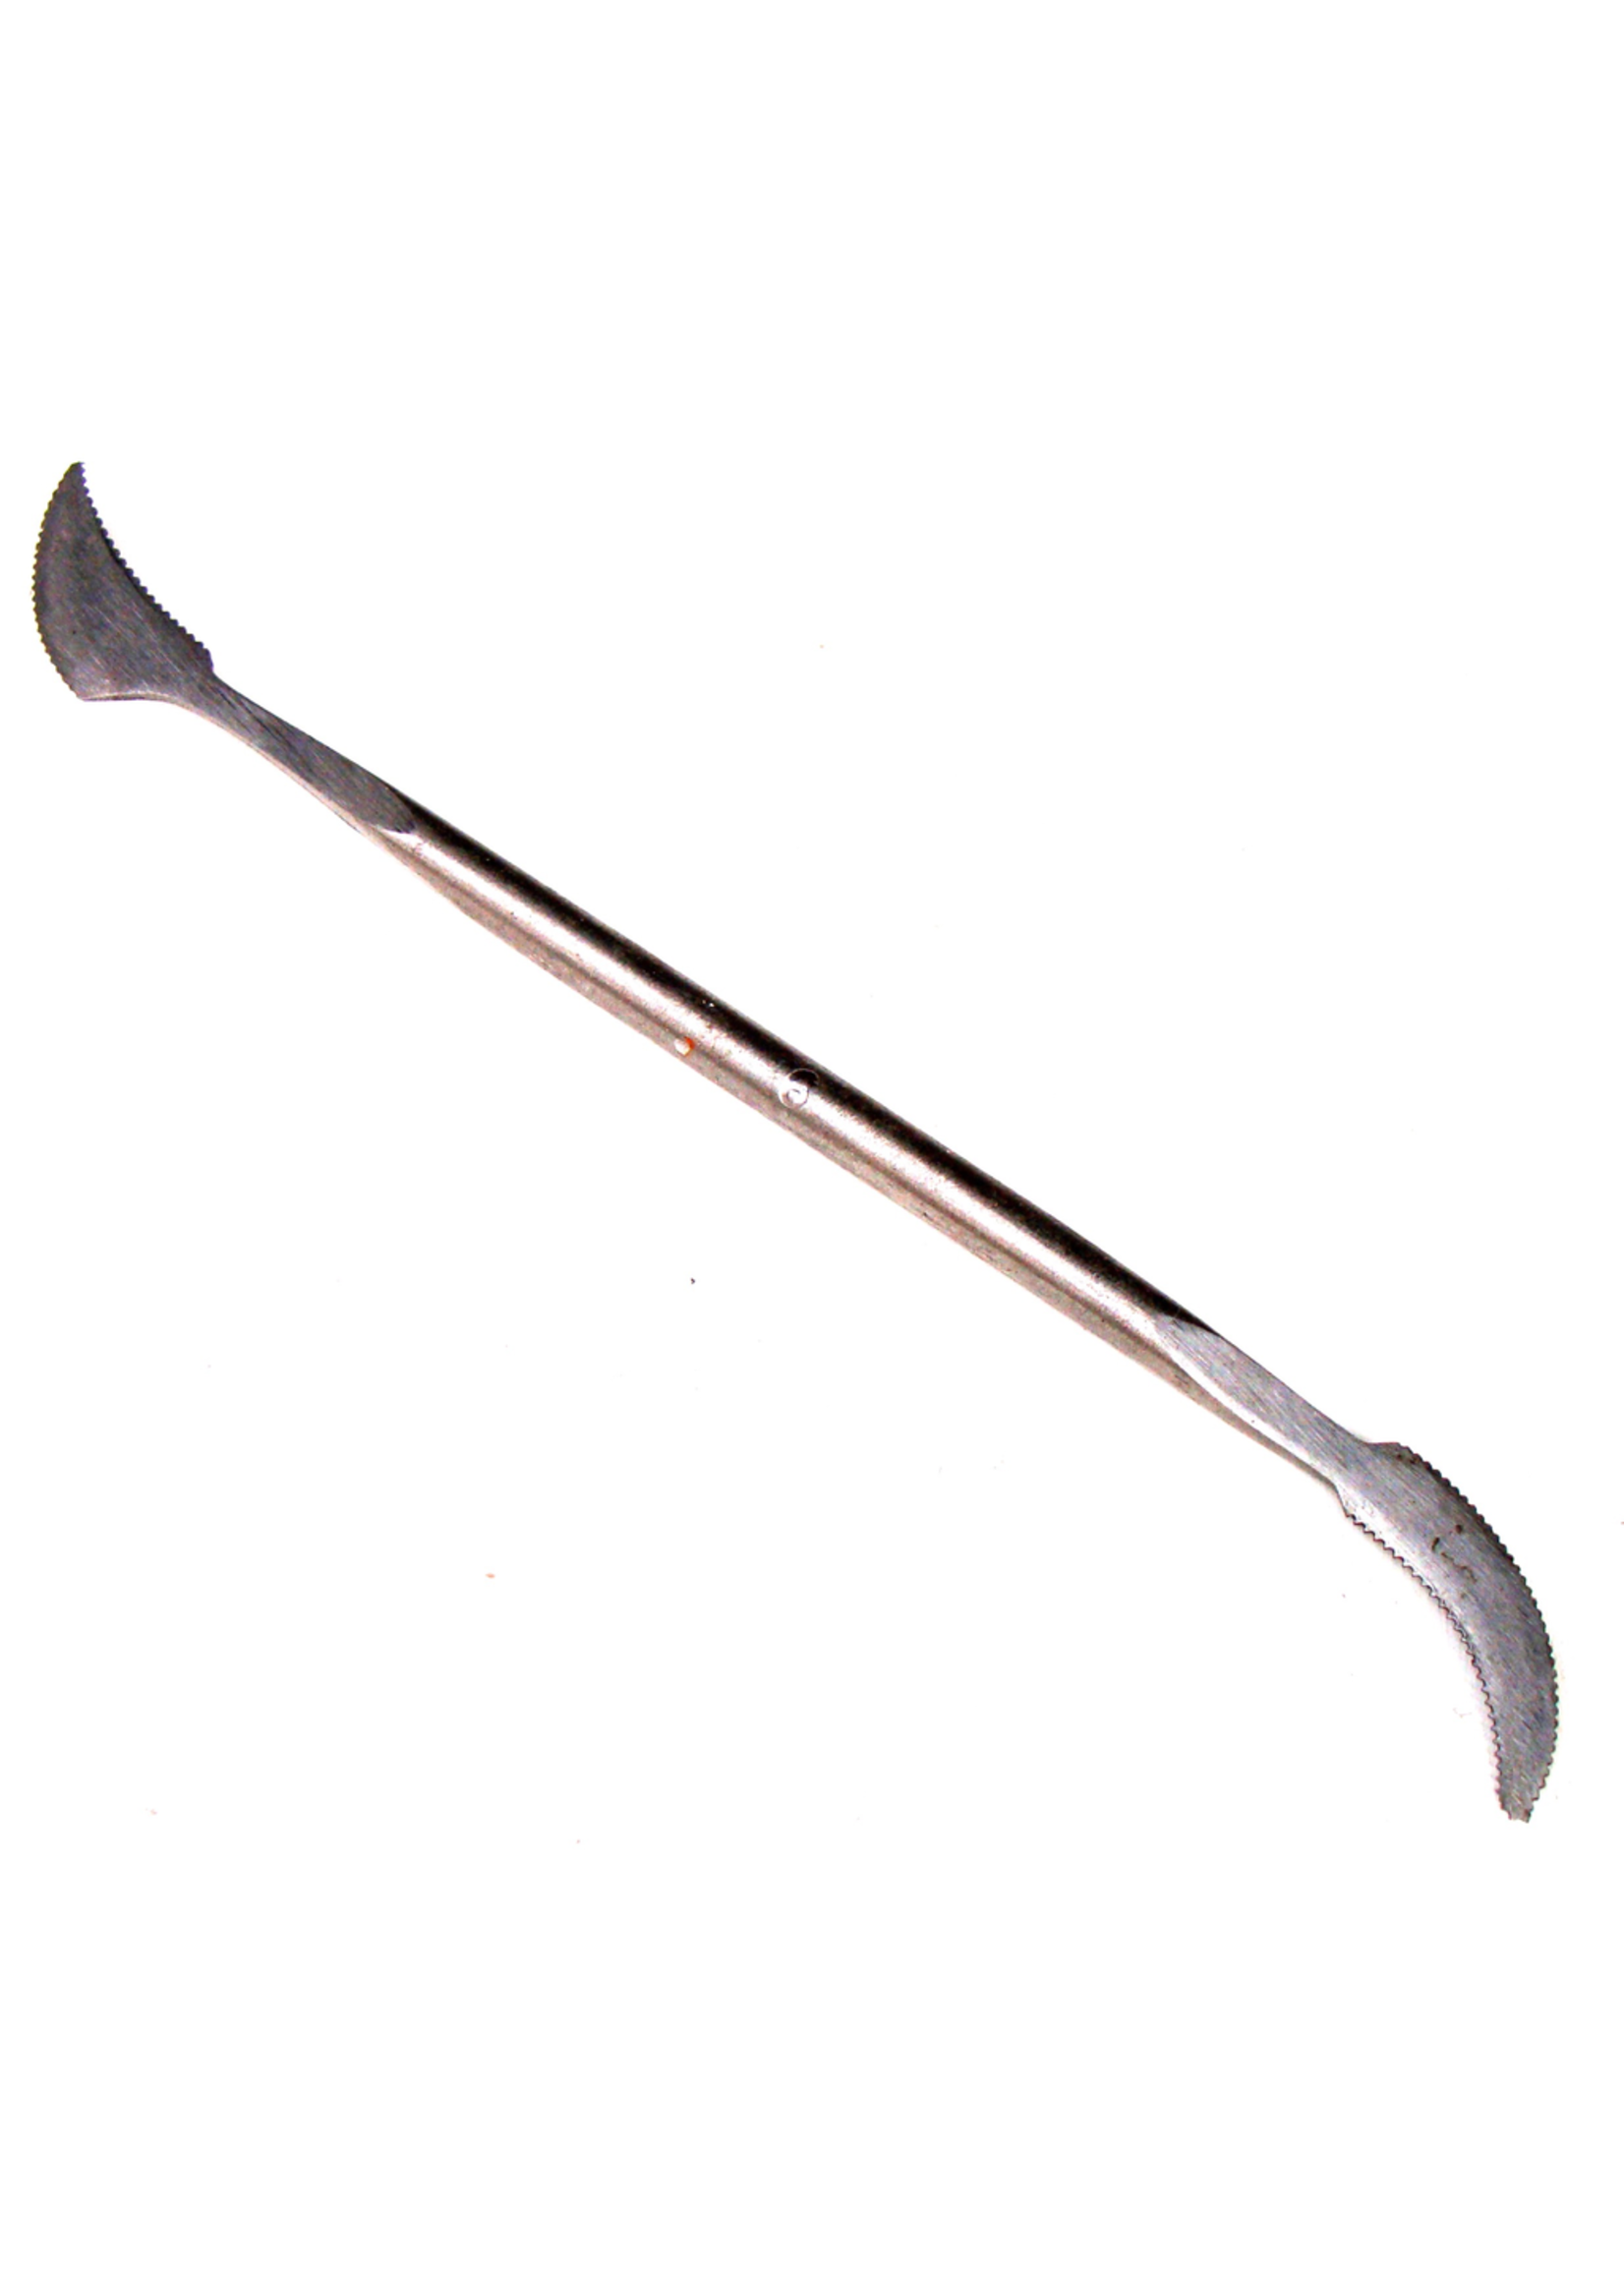 Forged Steel Tool #6